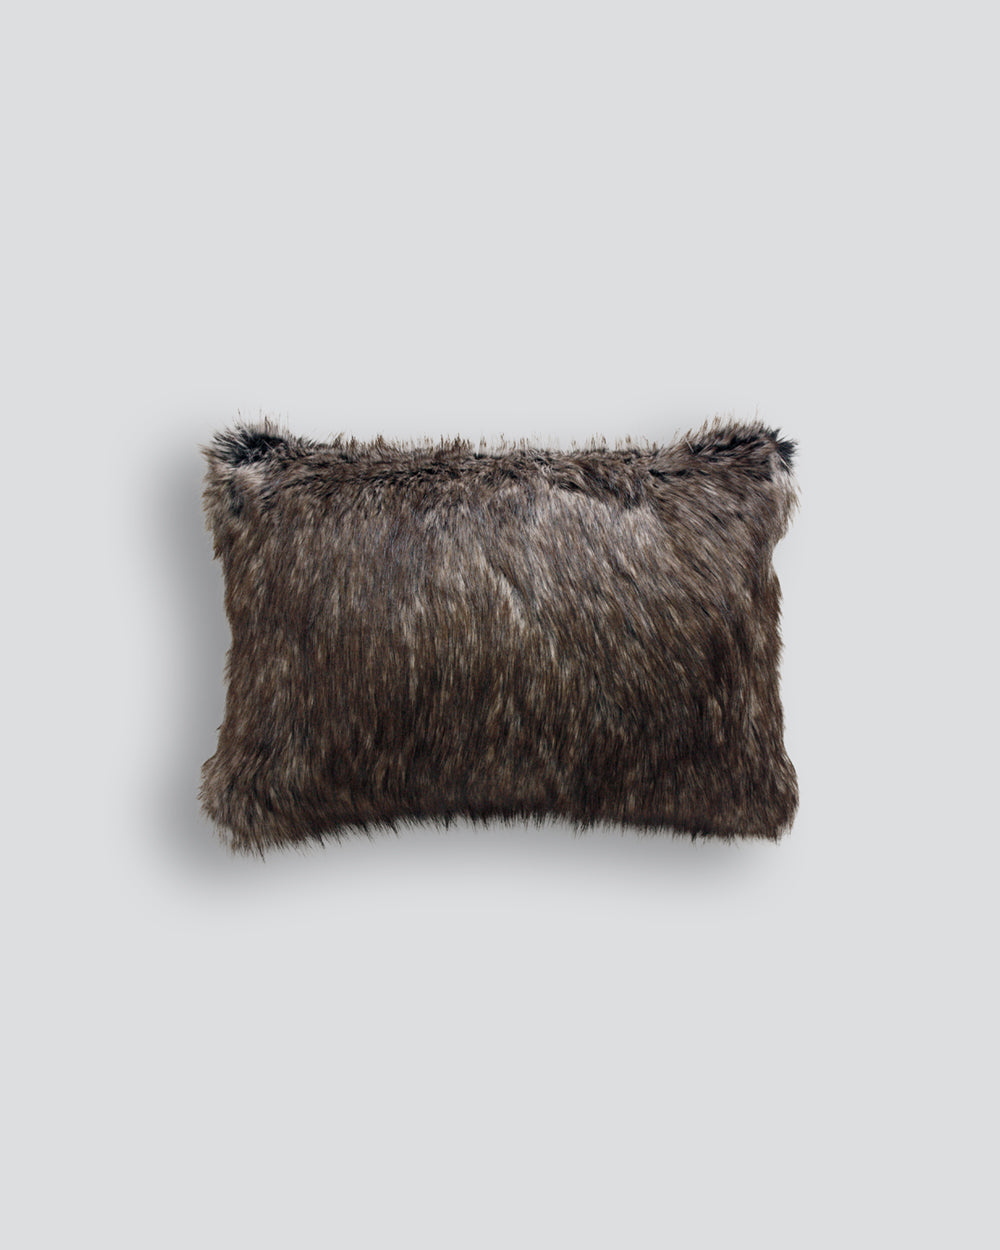 Heirloom Husky Cushions in Faux Fur are available from Make Your House A Home Premium Stockist. Furniture Store Bendigo, Victoria. Australia Wide Delivery. Furtex Baya.